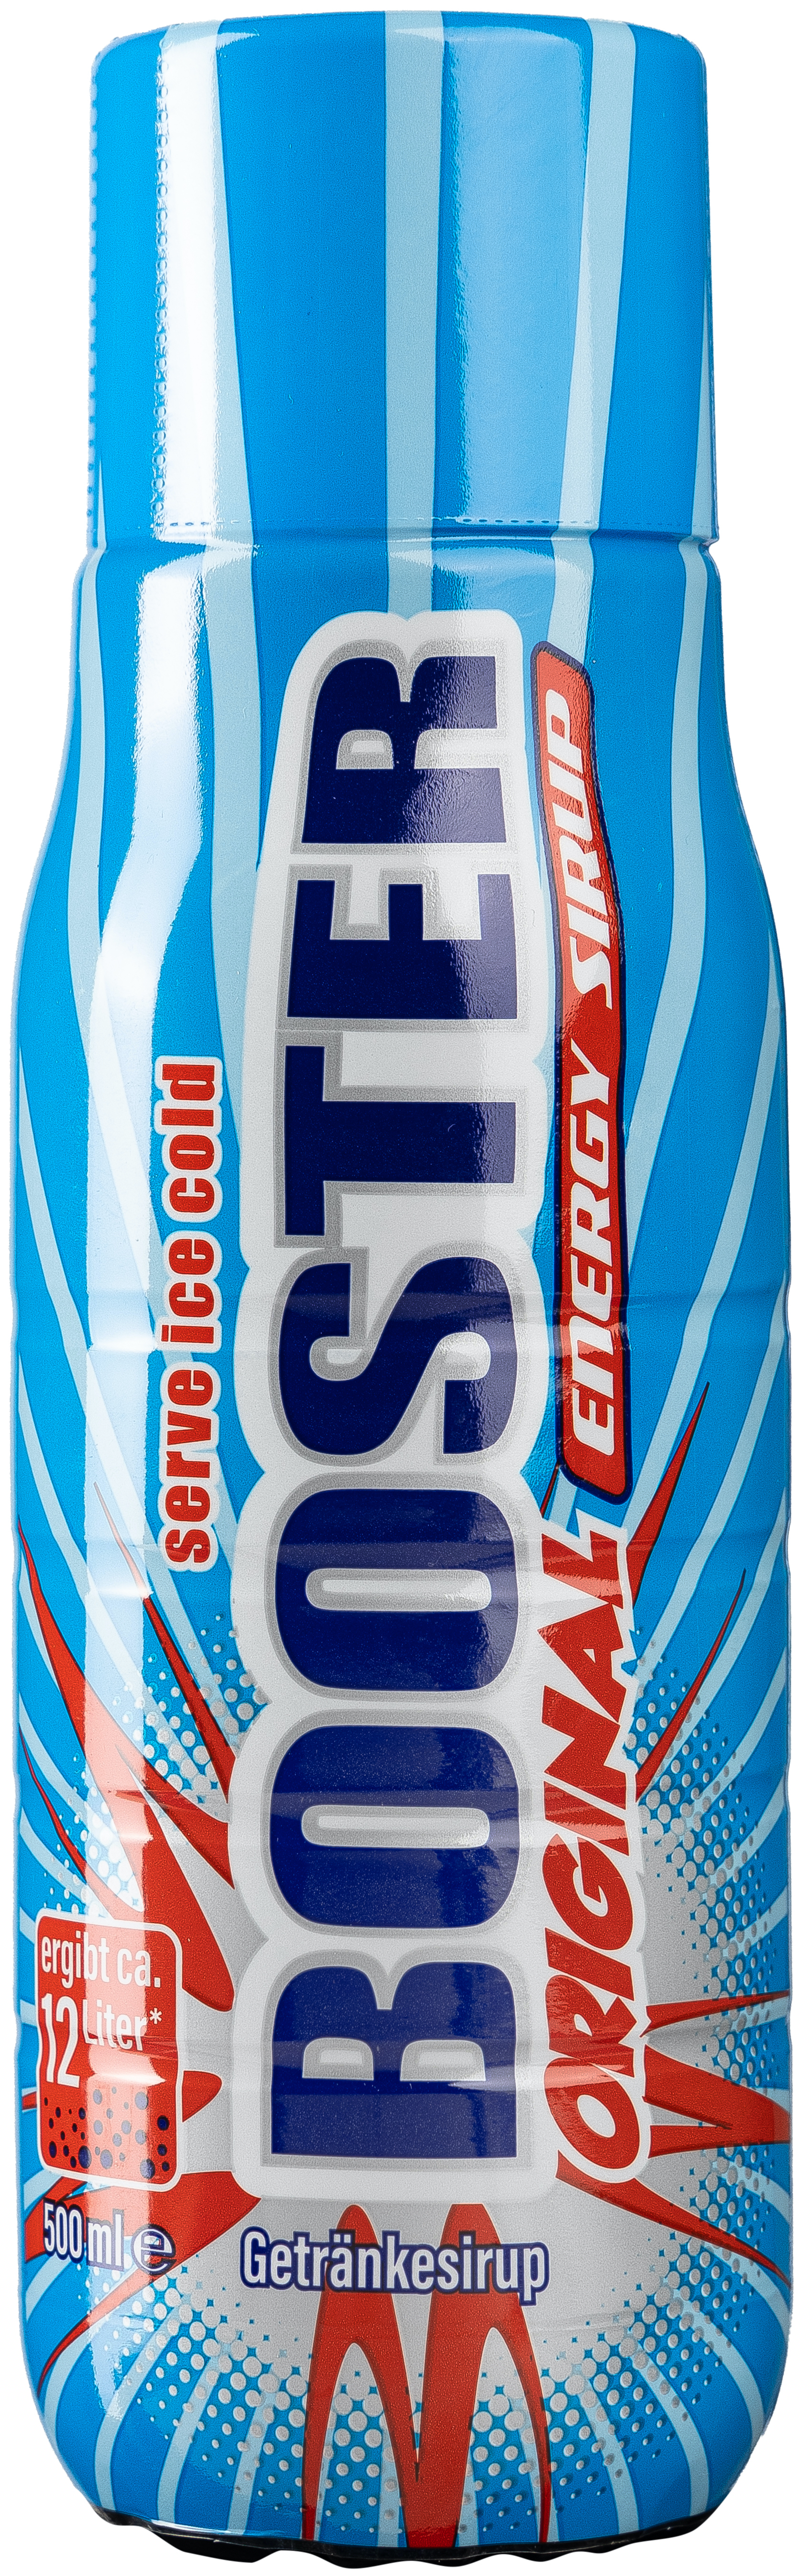 Booster Energy Sirup 0,5L